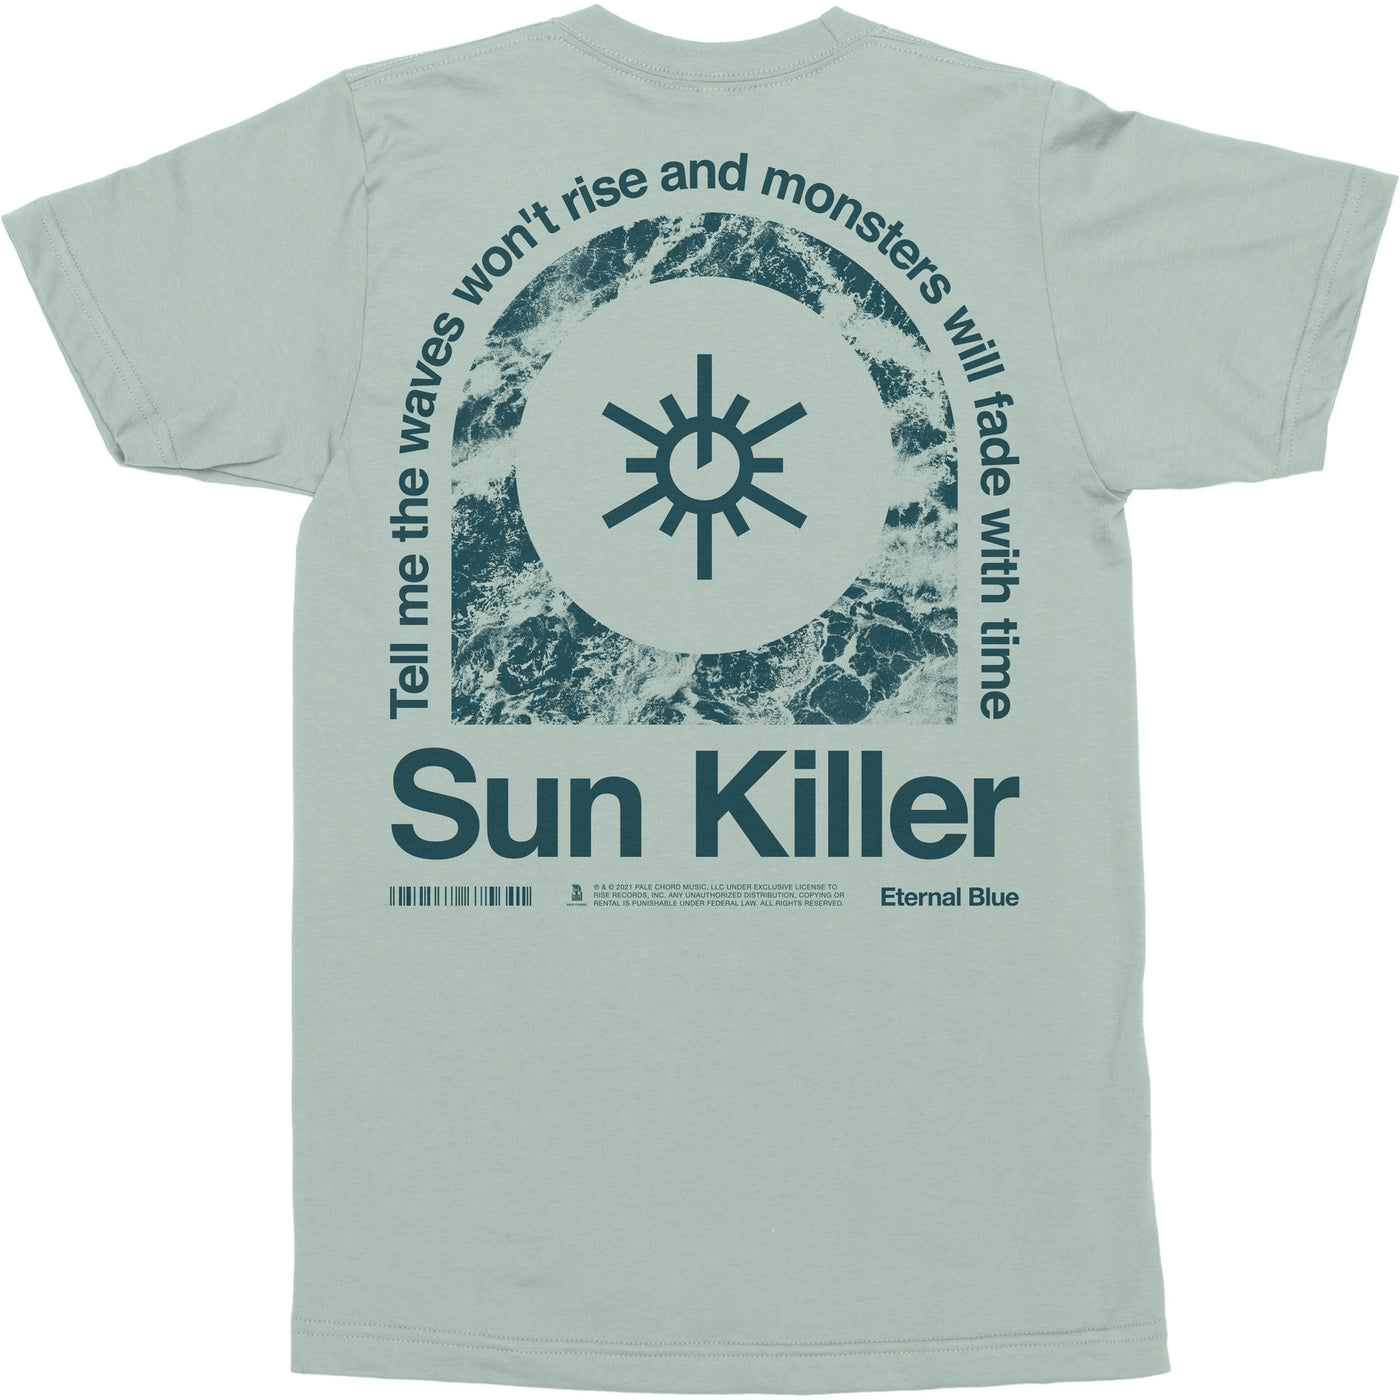 back of a light blue/gray tshirt against white background. the center of the shirt features a sun symbol in dark blue. surrounding it is an arch that is blue and white marble fill. below this in dark blue text reads "sun killer". below this is a barcode, small blue text, and "eternal blue". wrapping around the arch is the text "tell me the waves won't rise and monsters will fade with time".